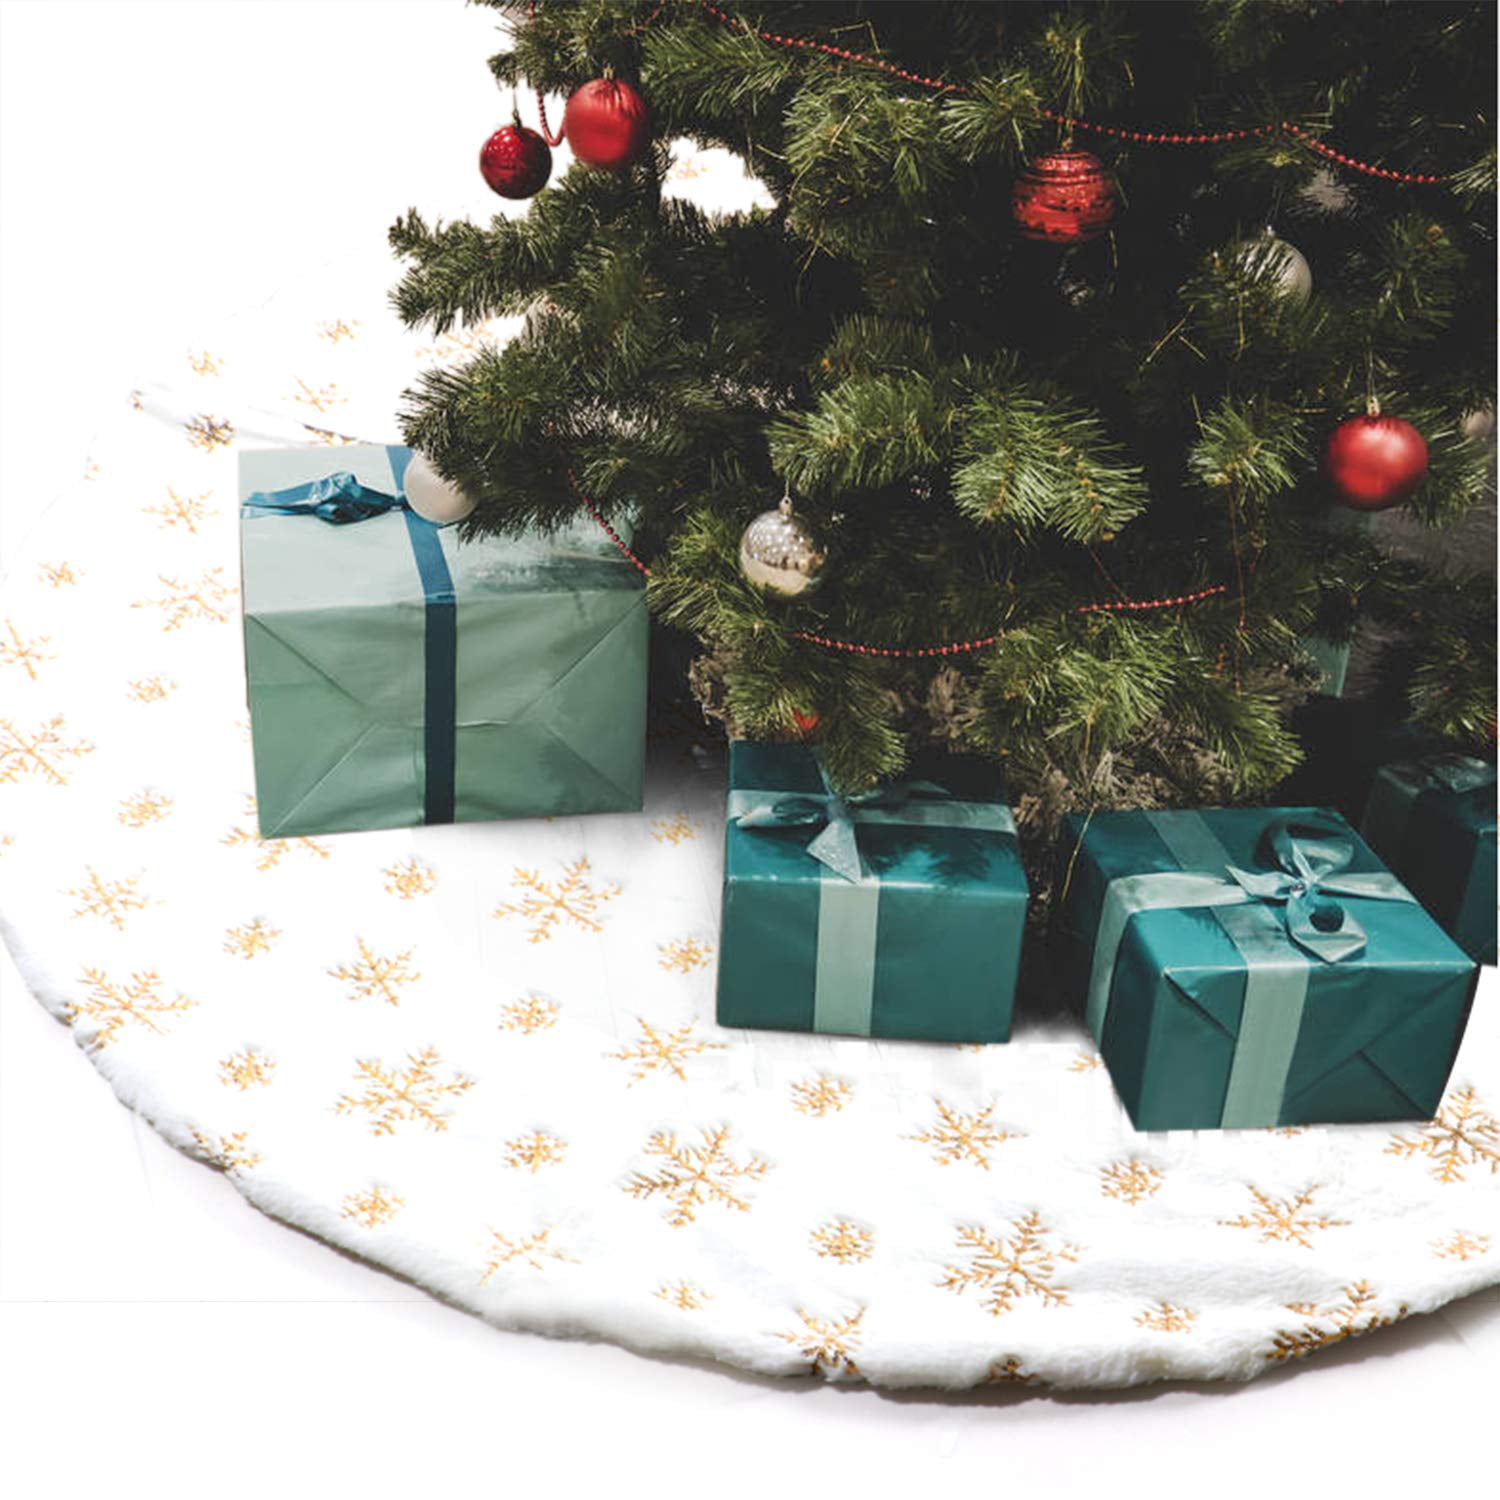 Details about   Christmas Tree Skirt Large Luxury Faux Fur Snowflakes  Xmas Floor Mat 35 inch 